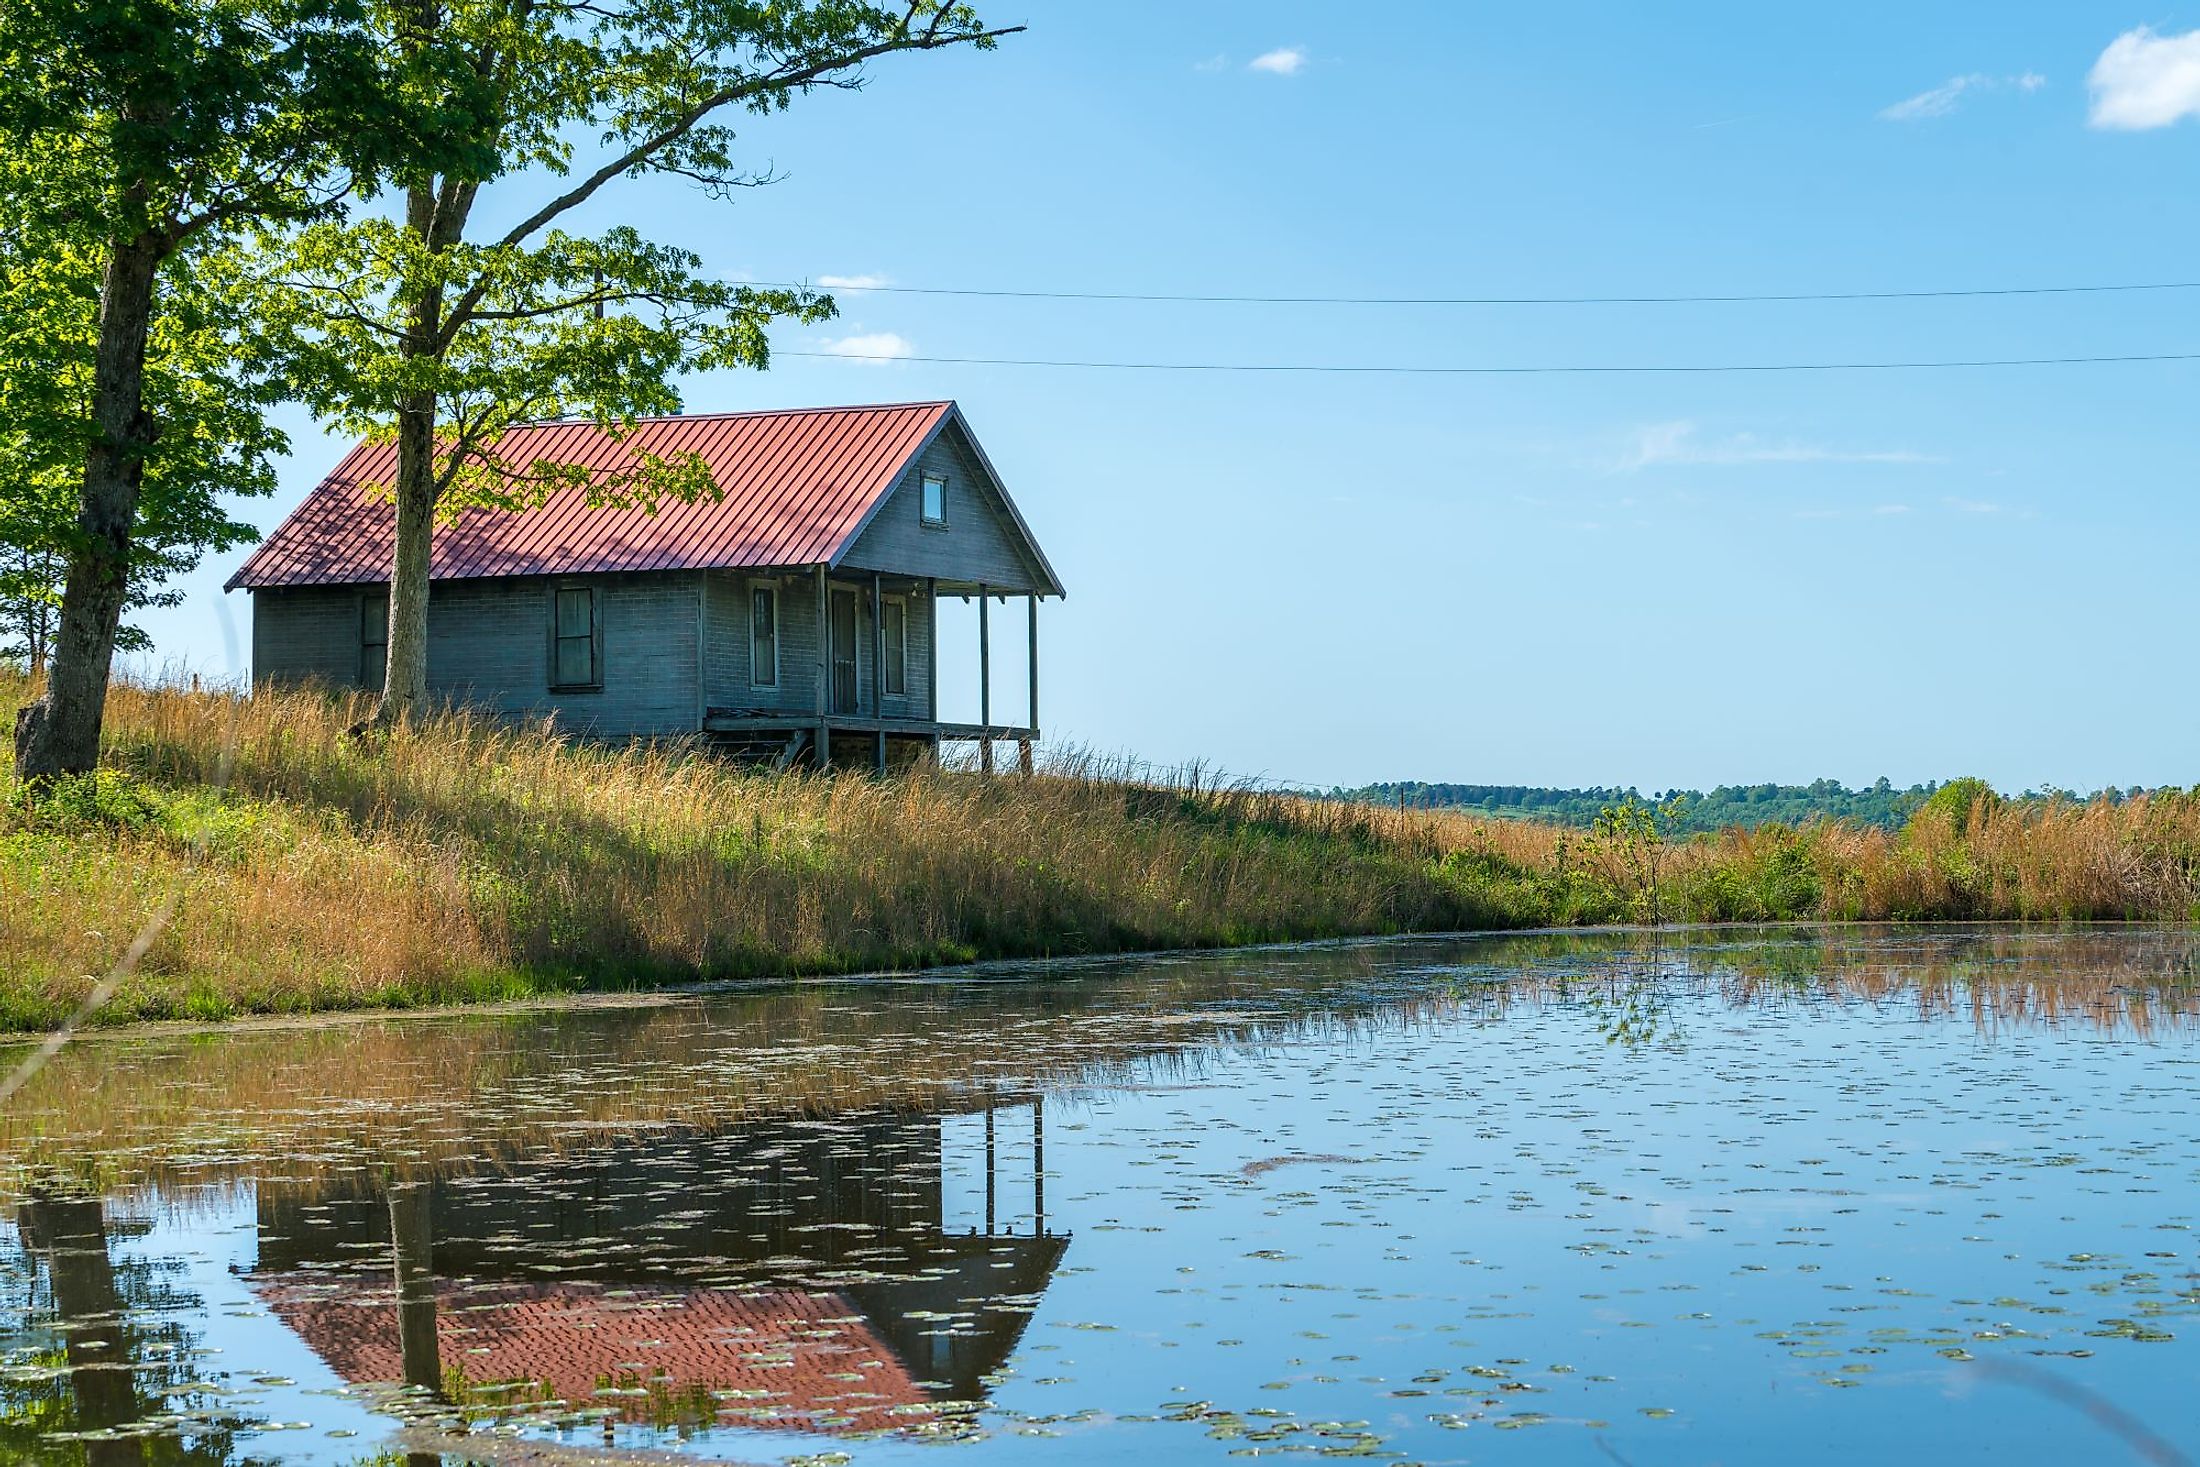 Rural old house barn reflected in pond water in northwest Arkansas, Ozark Mountains. 